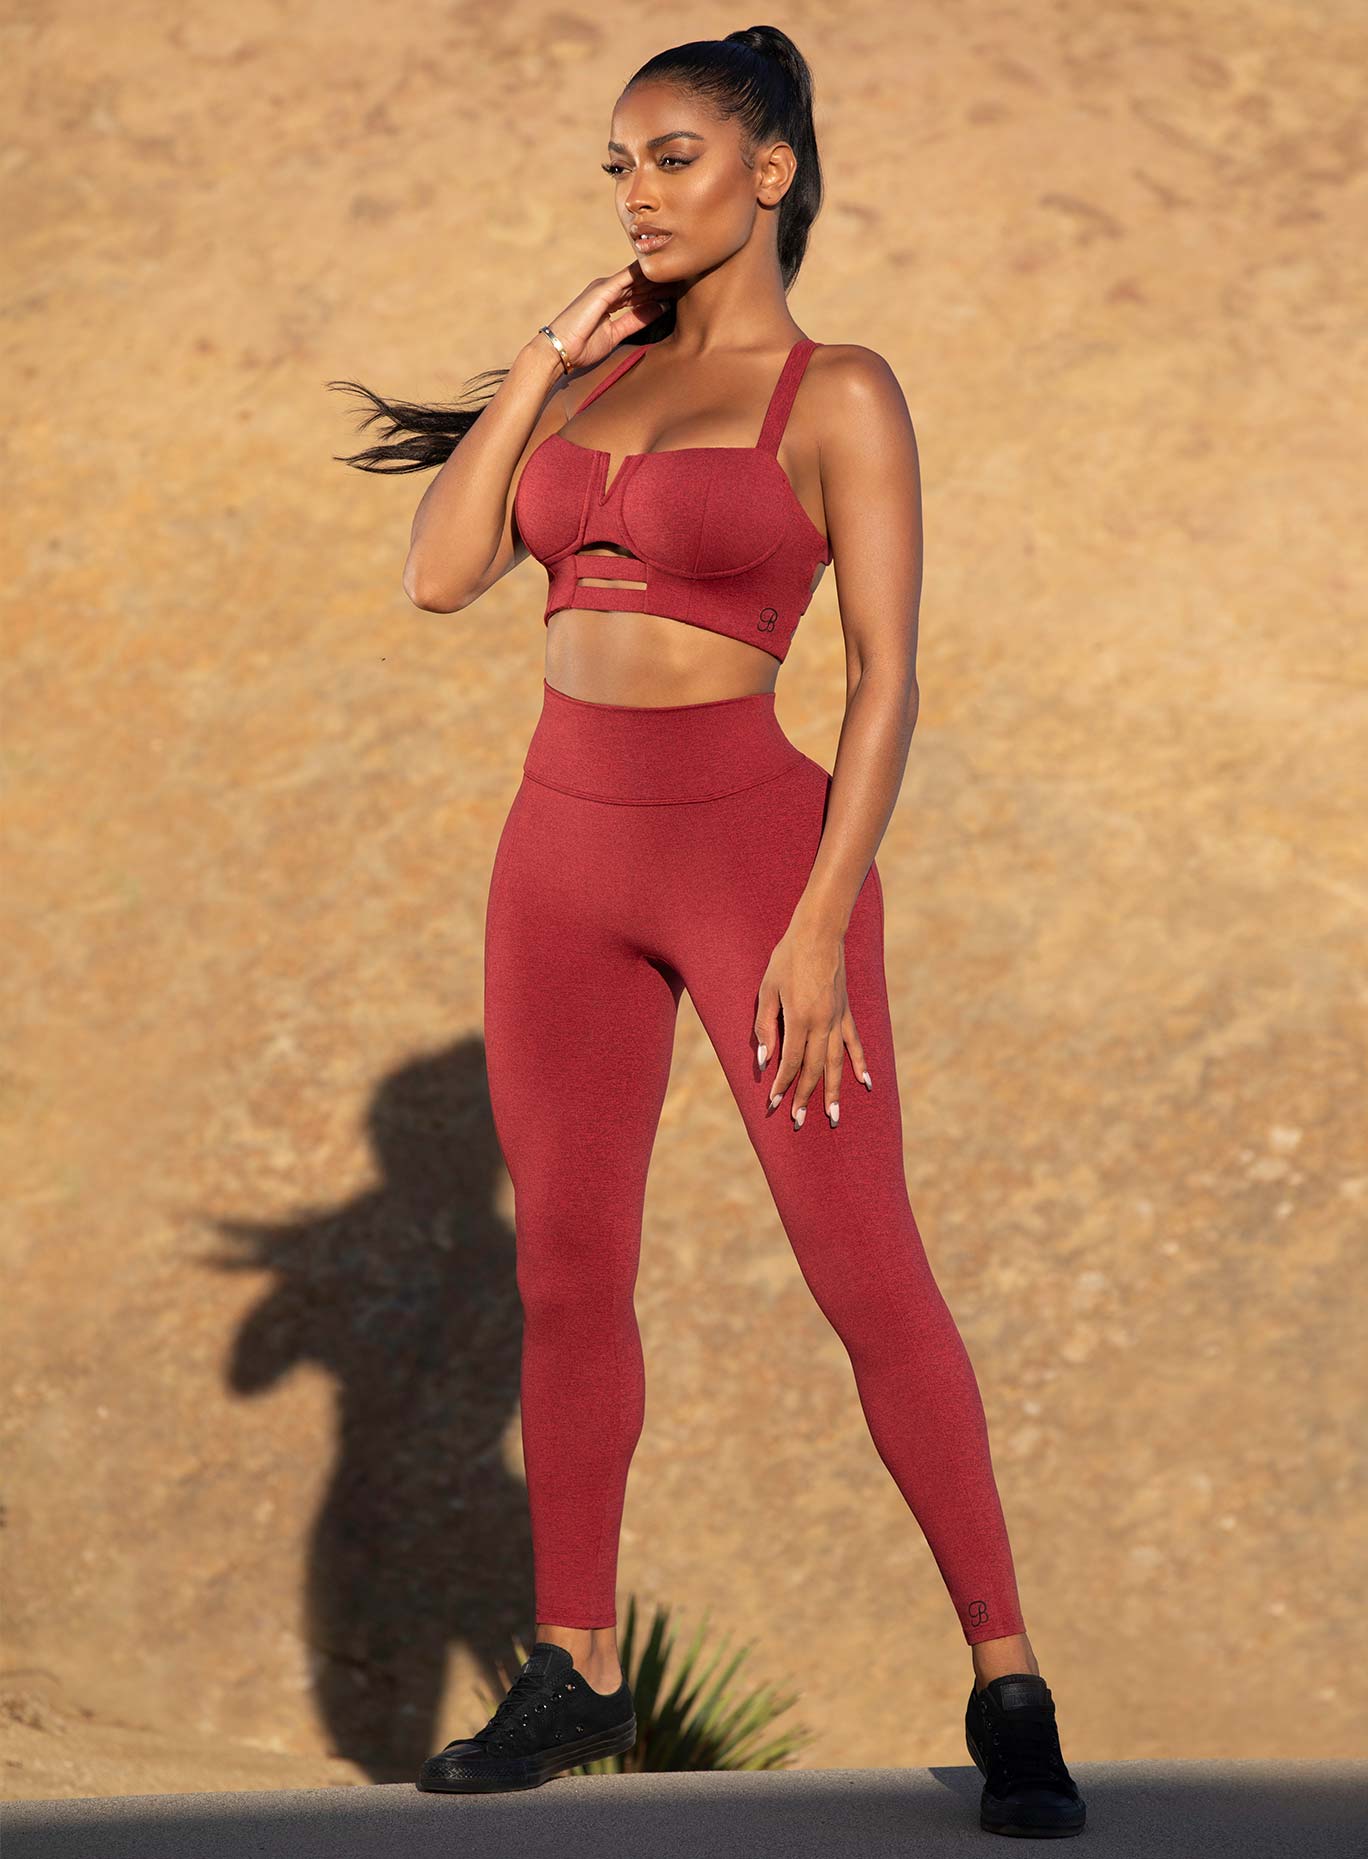 Three quarters view of the model in a red high waist leggings with a V back design